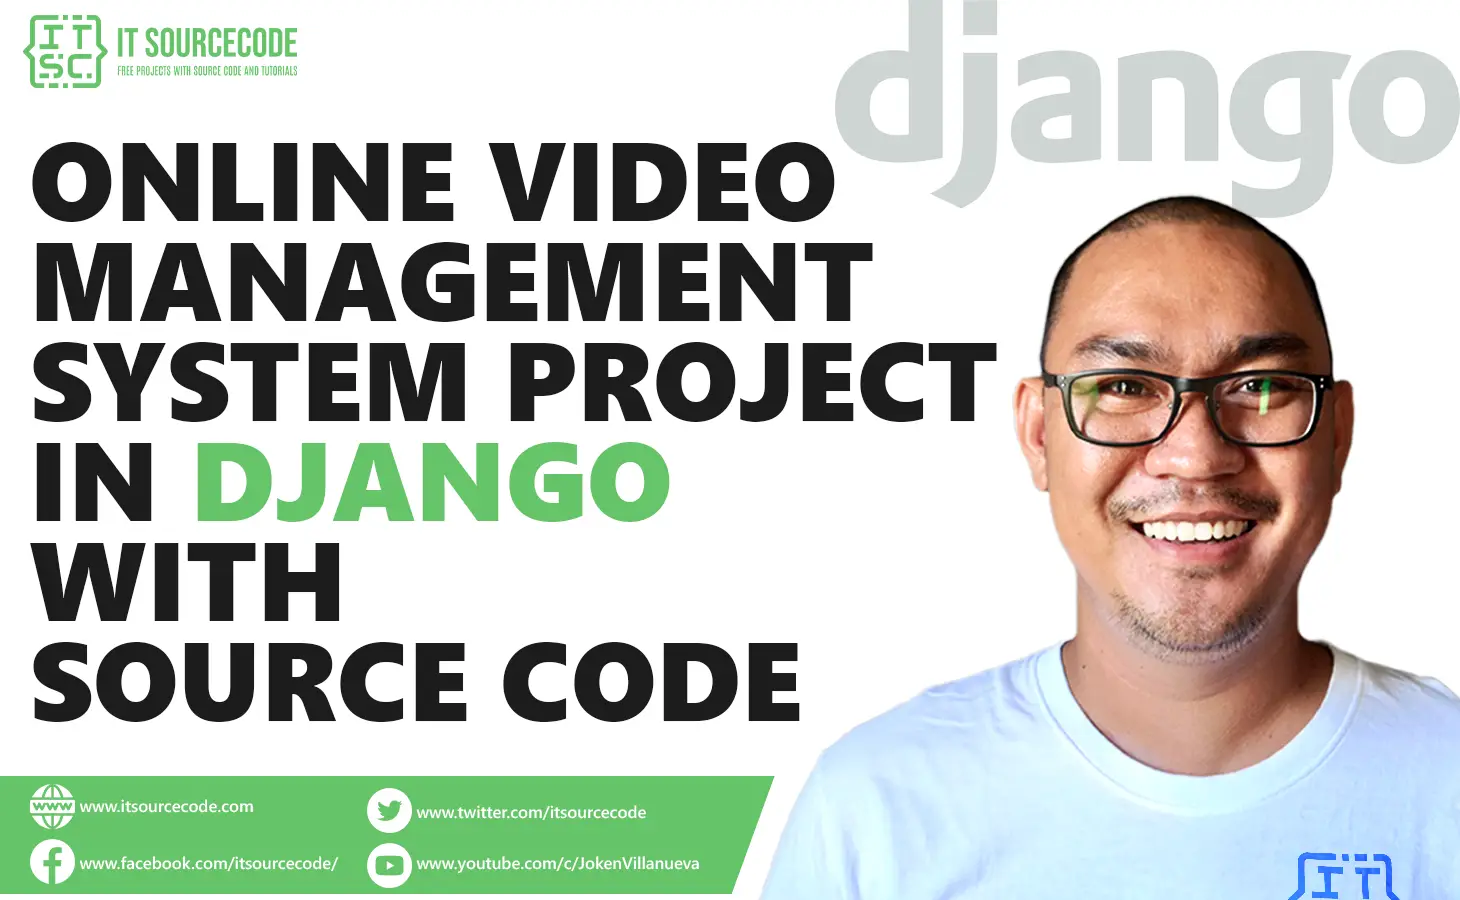 Online Video Management System Project in Django with Source Code